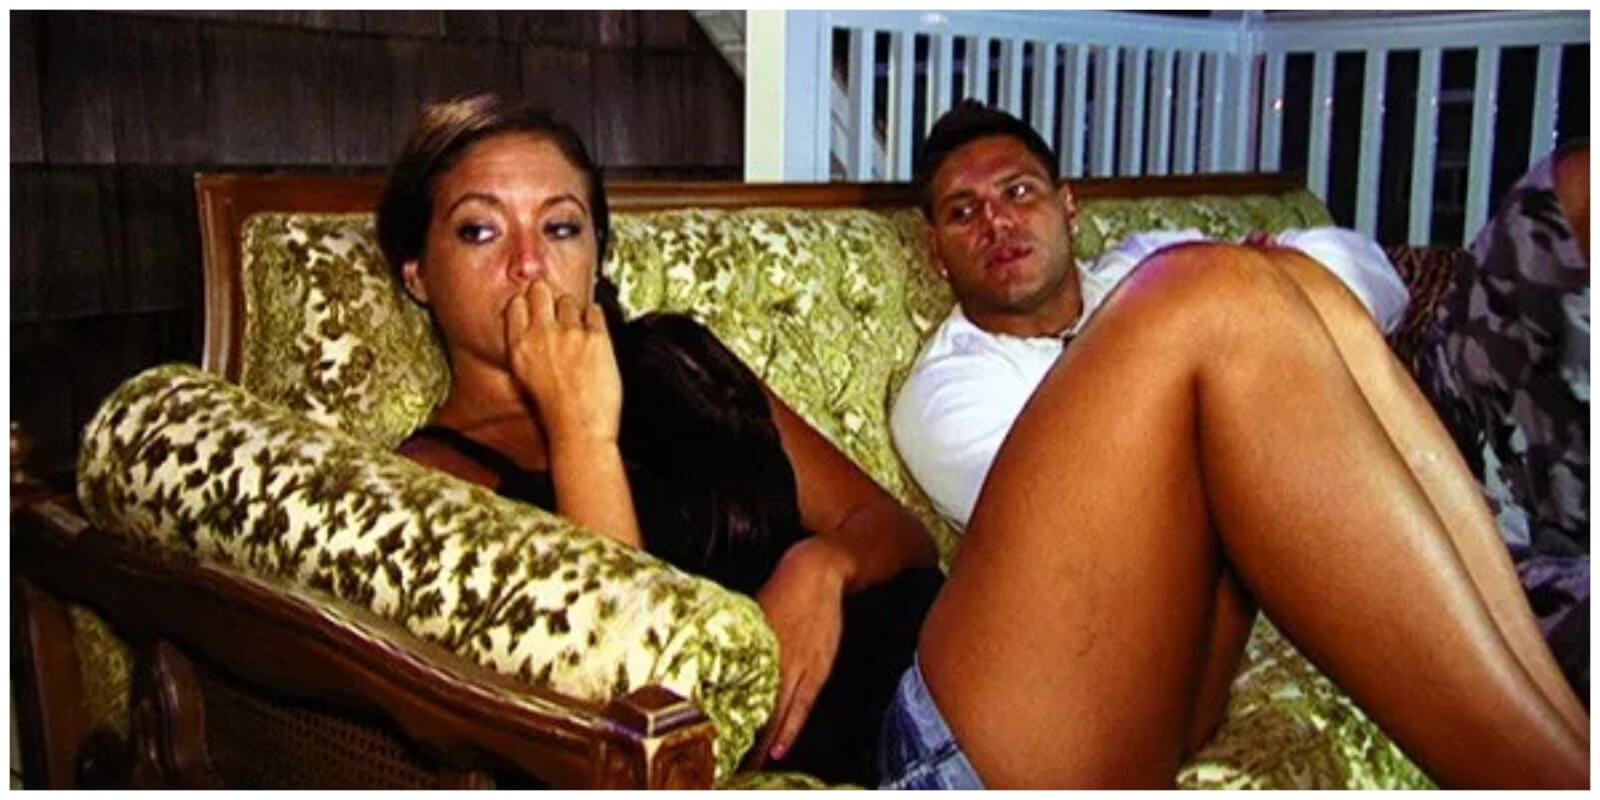 Sammi Giancola and Ronnie Ortiz-Magro were spotted at the same Florida resort where 'Jersey Shore' is filming season 6.